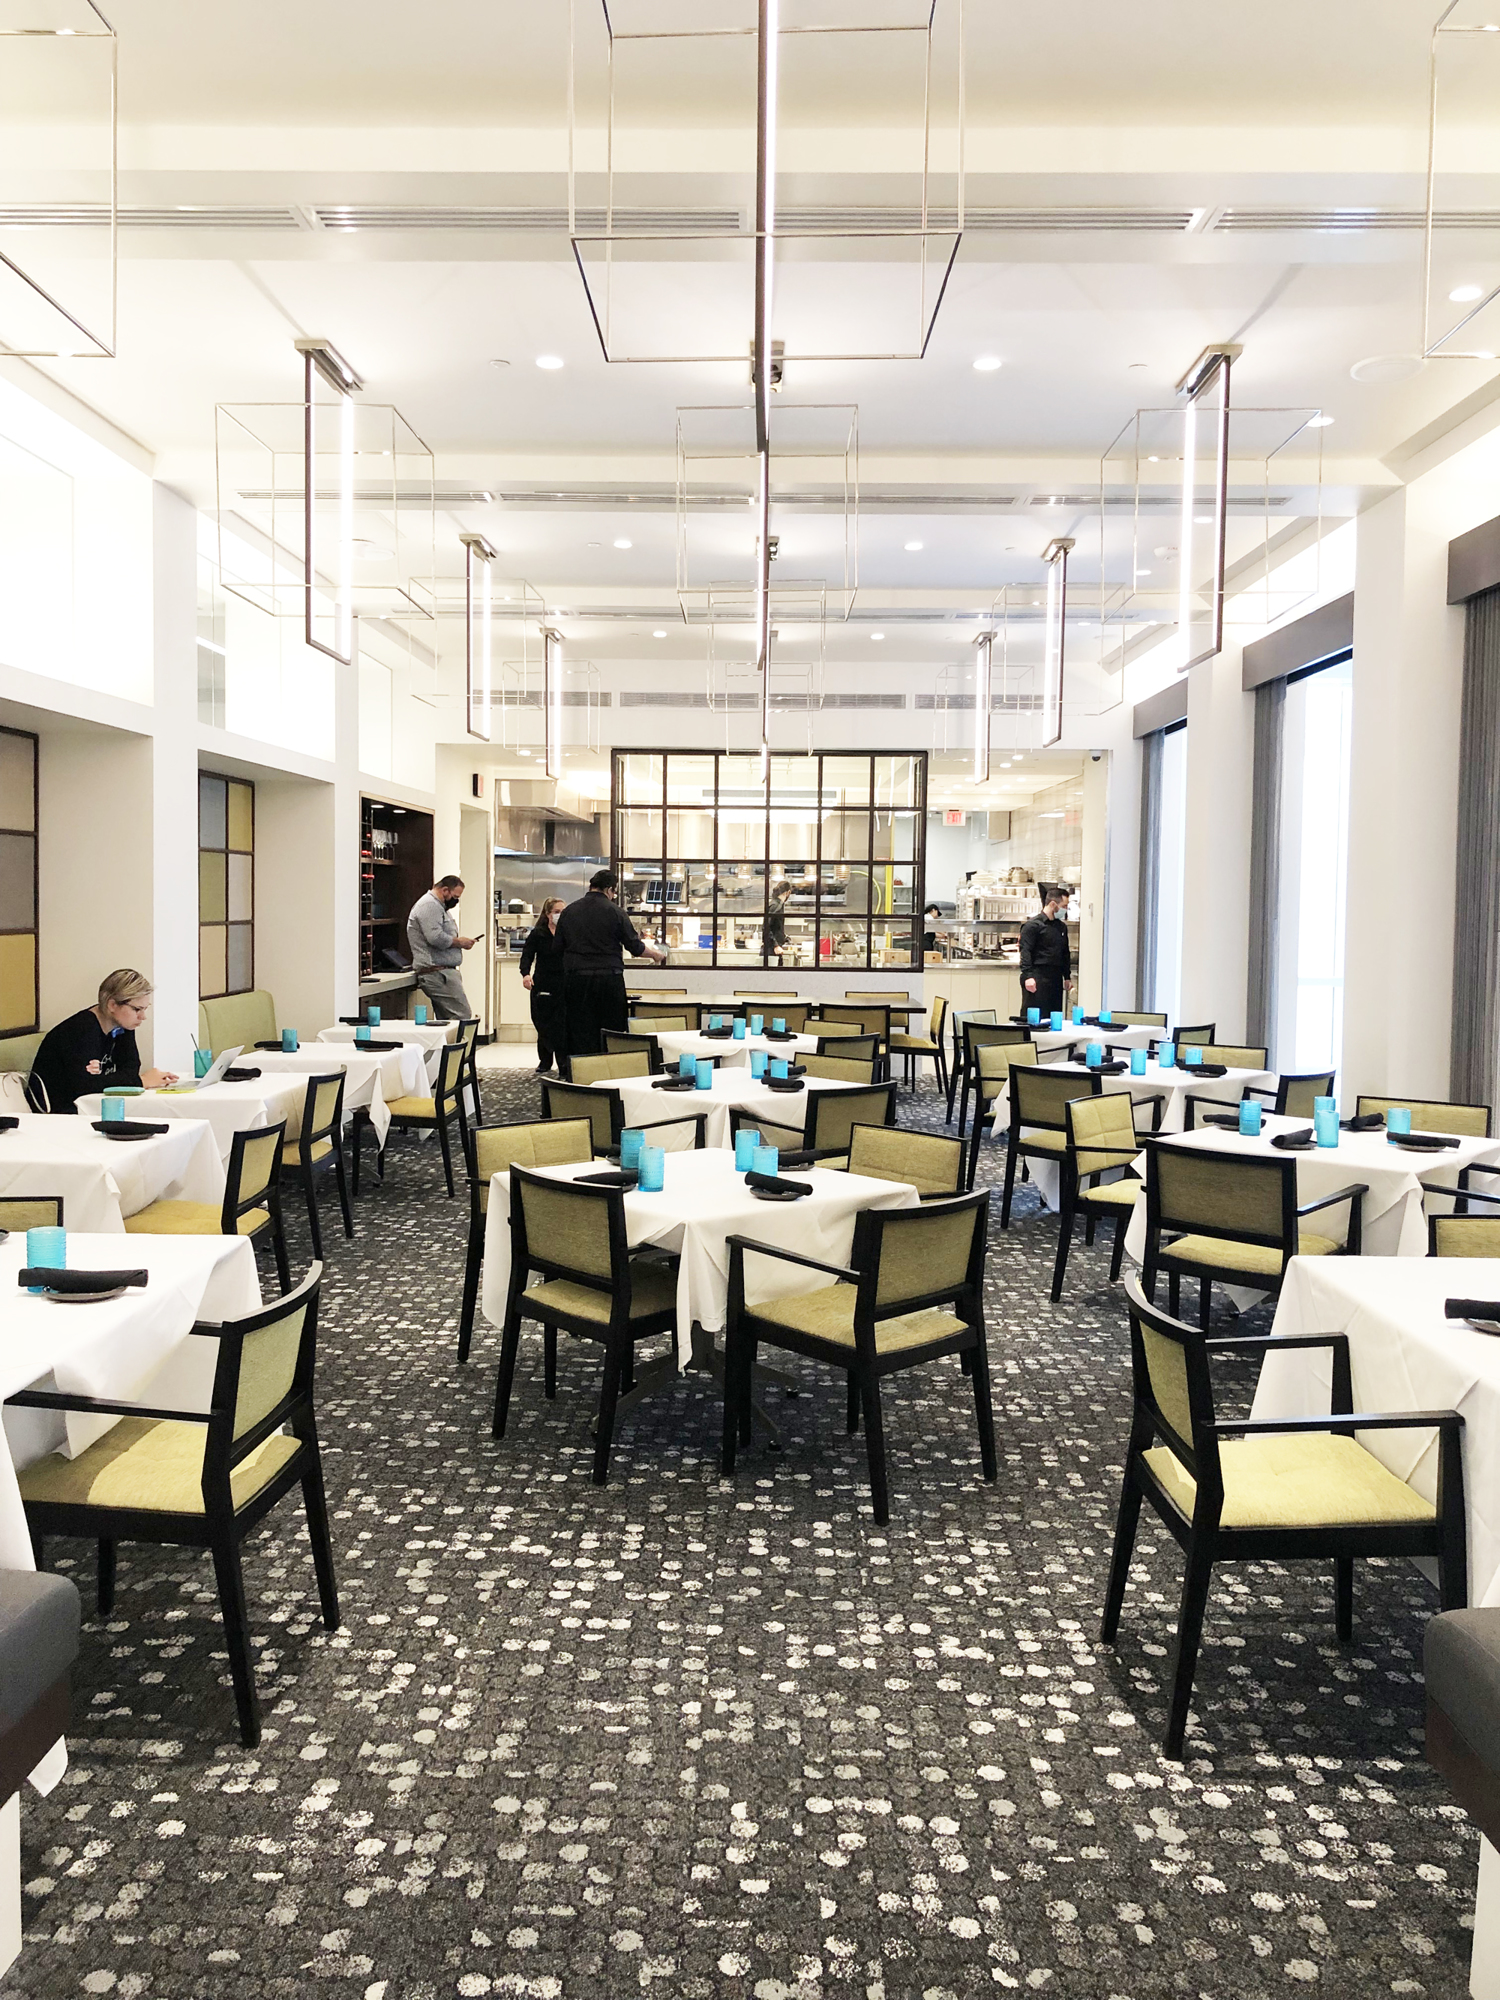 The Medure brothers are leasing 7,000 square feet of space for the full-service, sit-down restaurant and the adjacent Zest market. Total seating is 220, including an eight-seat private-dining area.